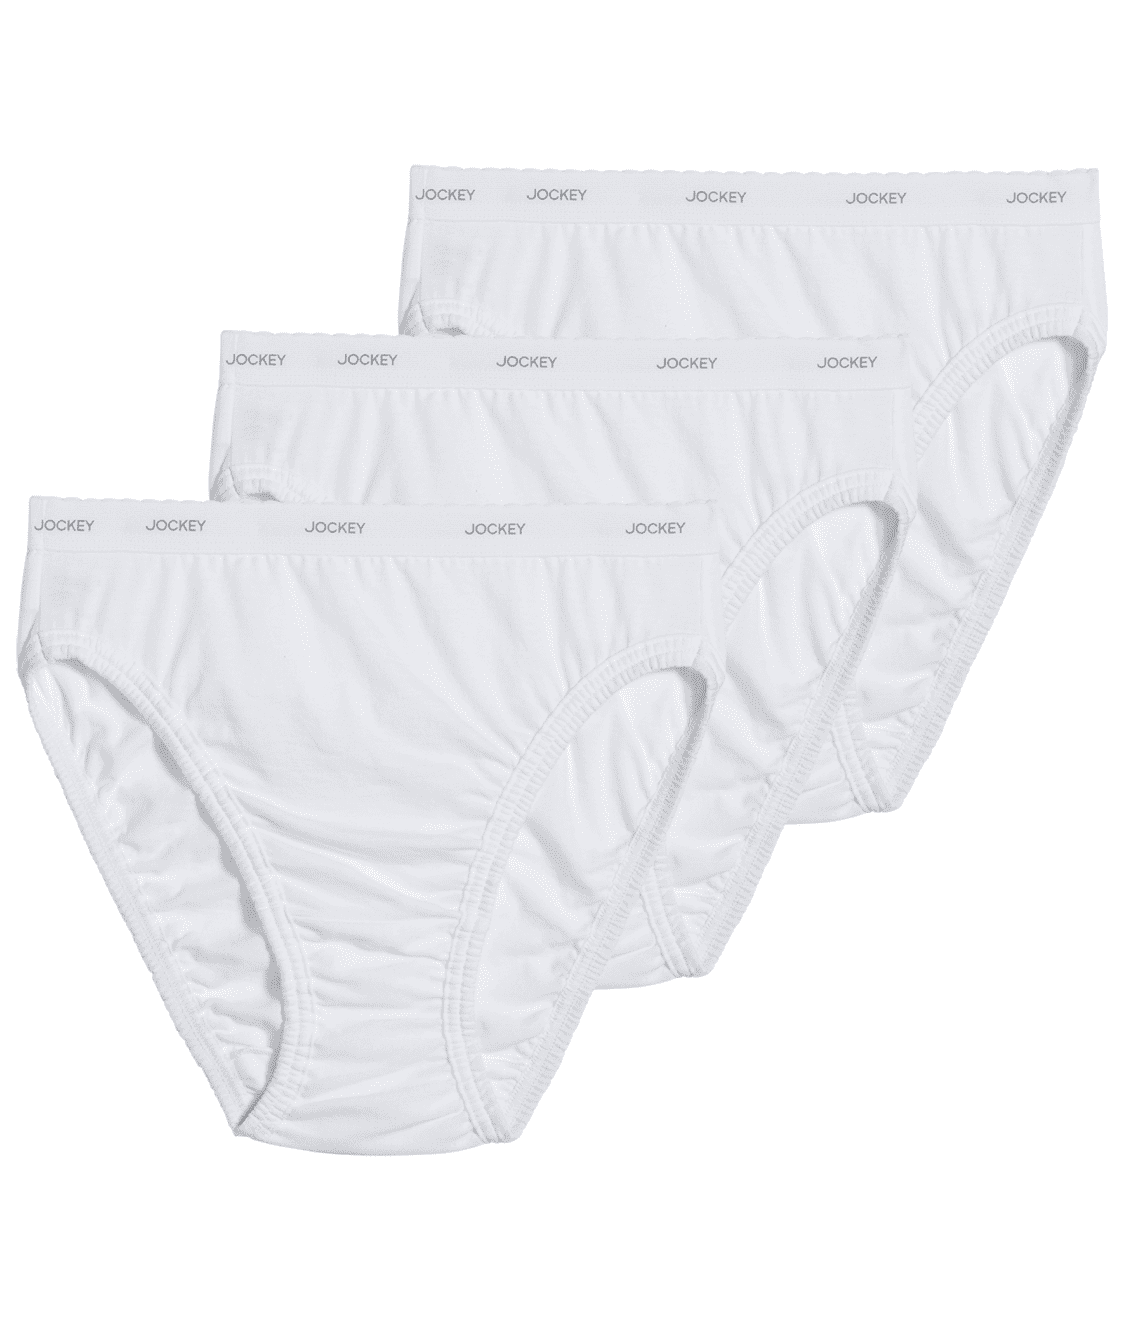 Jockey Classic French Cut Brief 3-Pack & Reviews